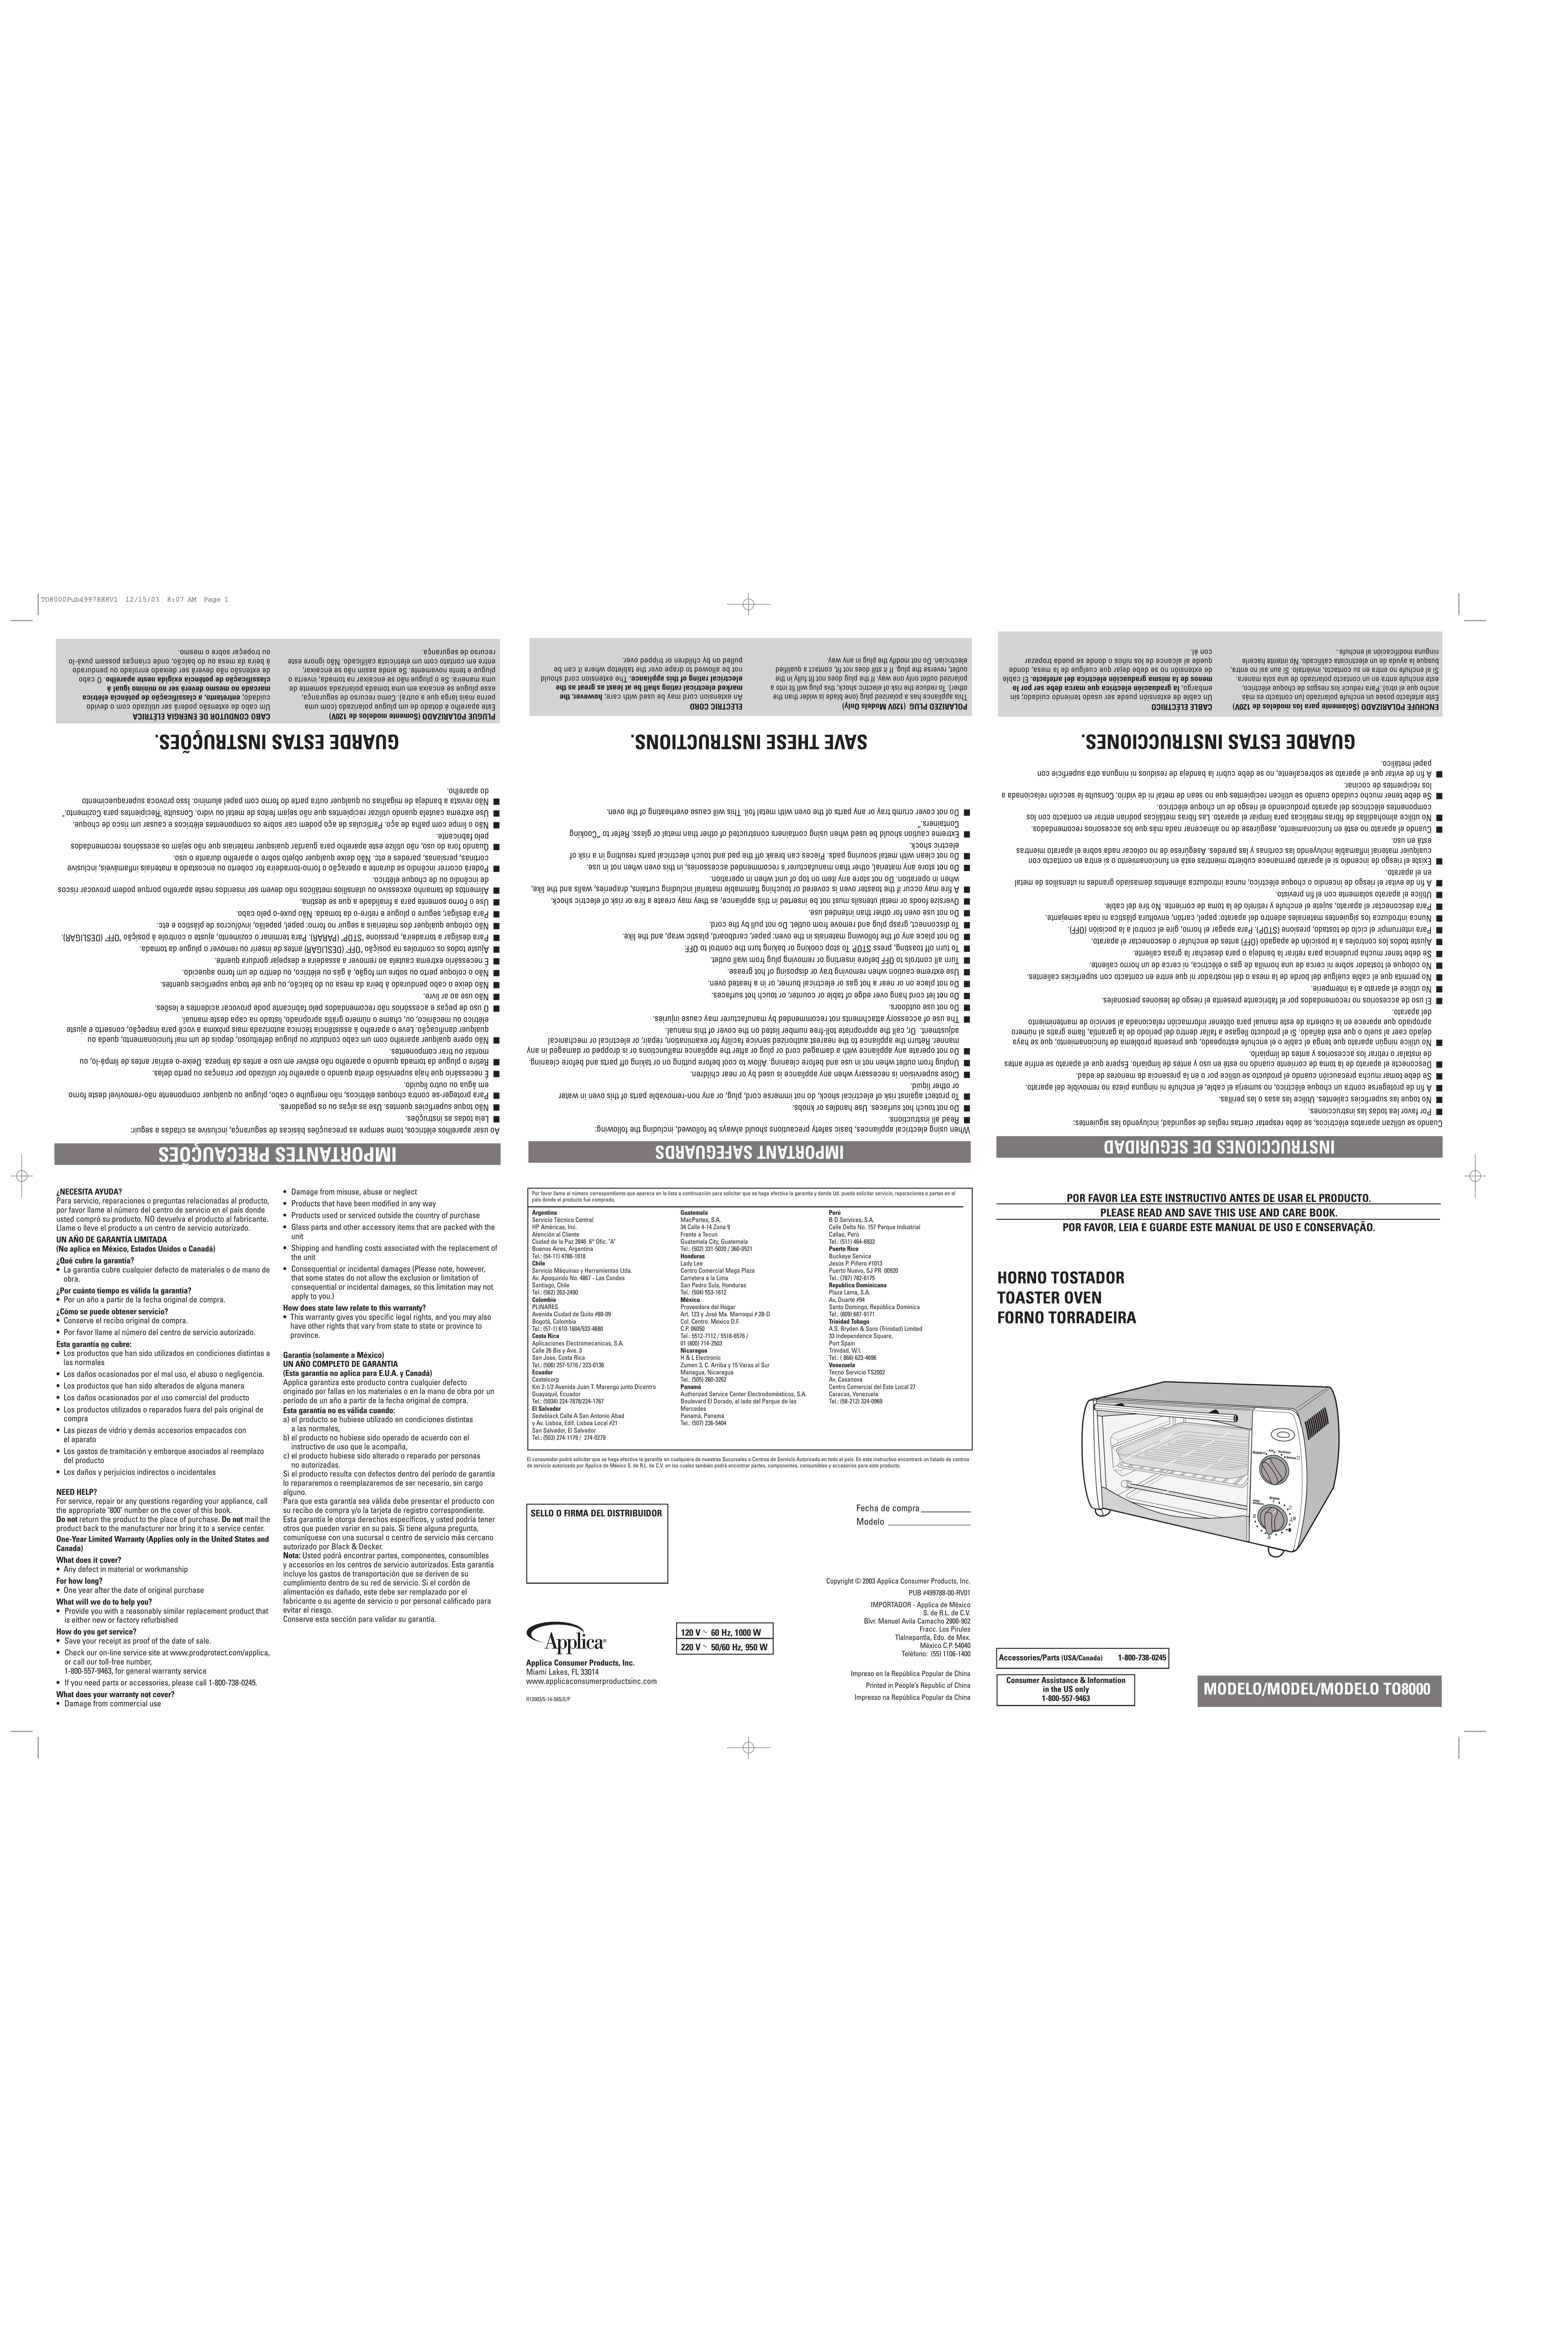 Applica TO8000 Toaster User Manual